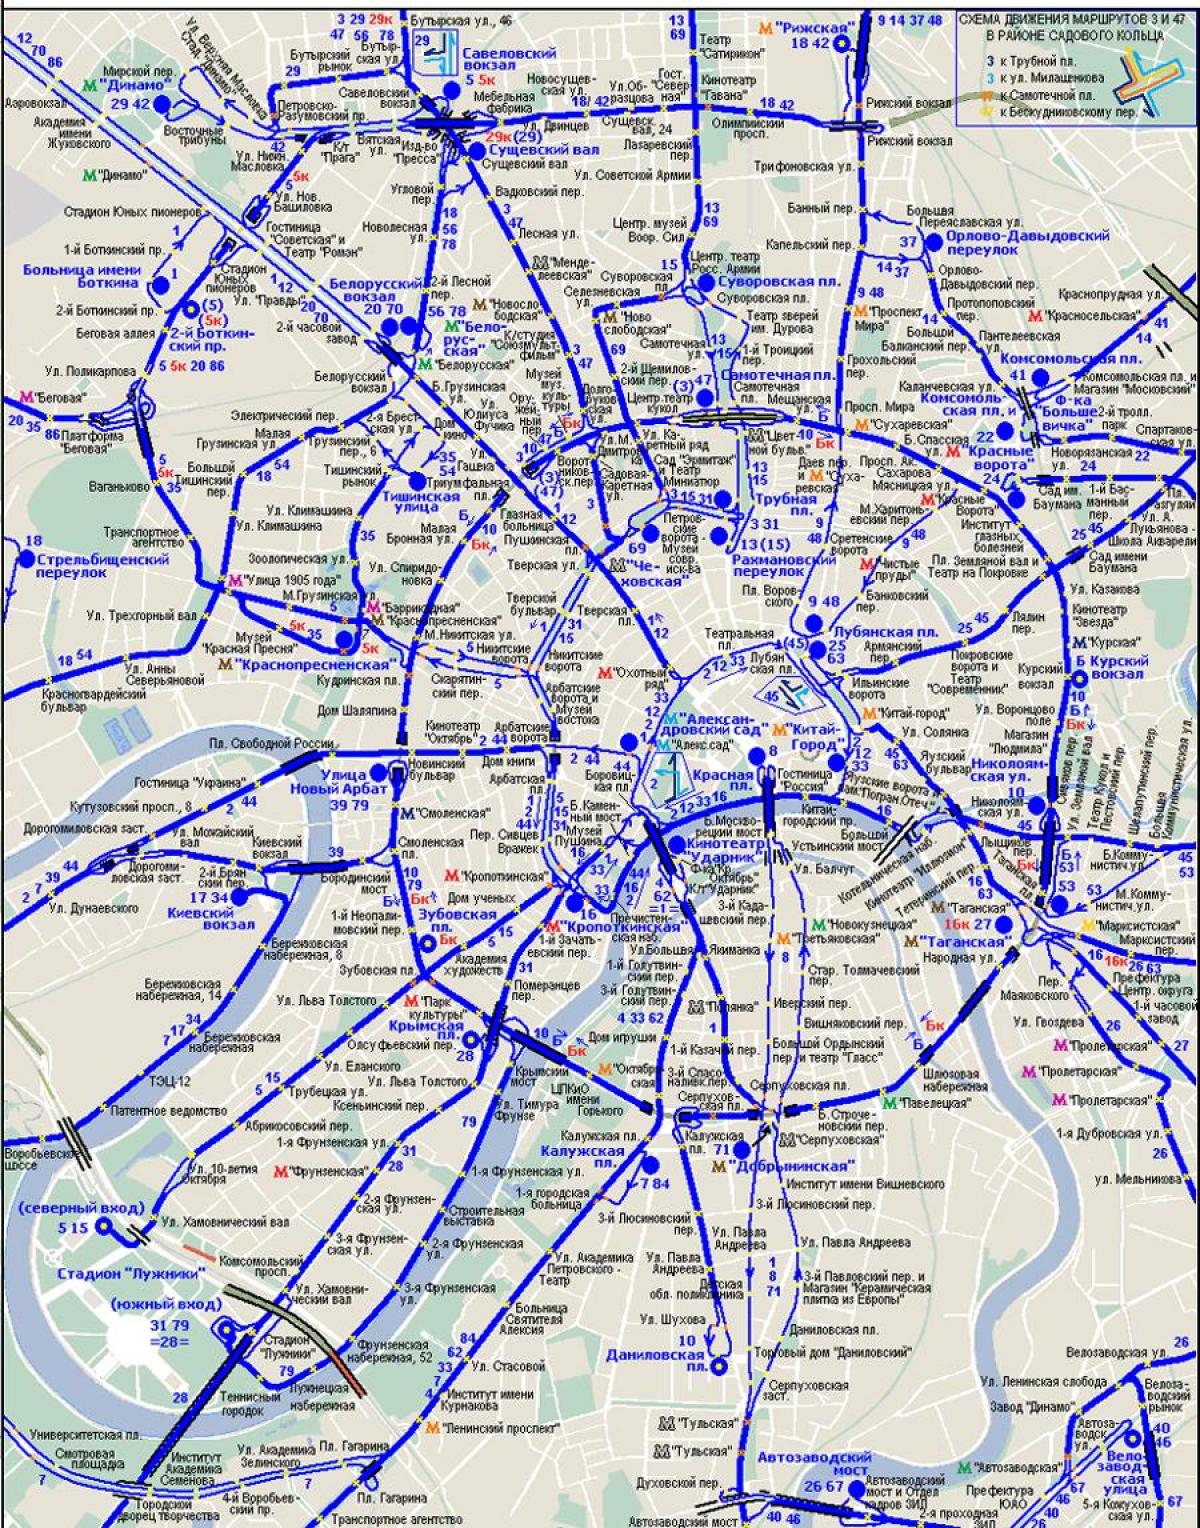 map of Moscow trolleybus